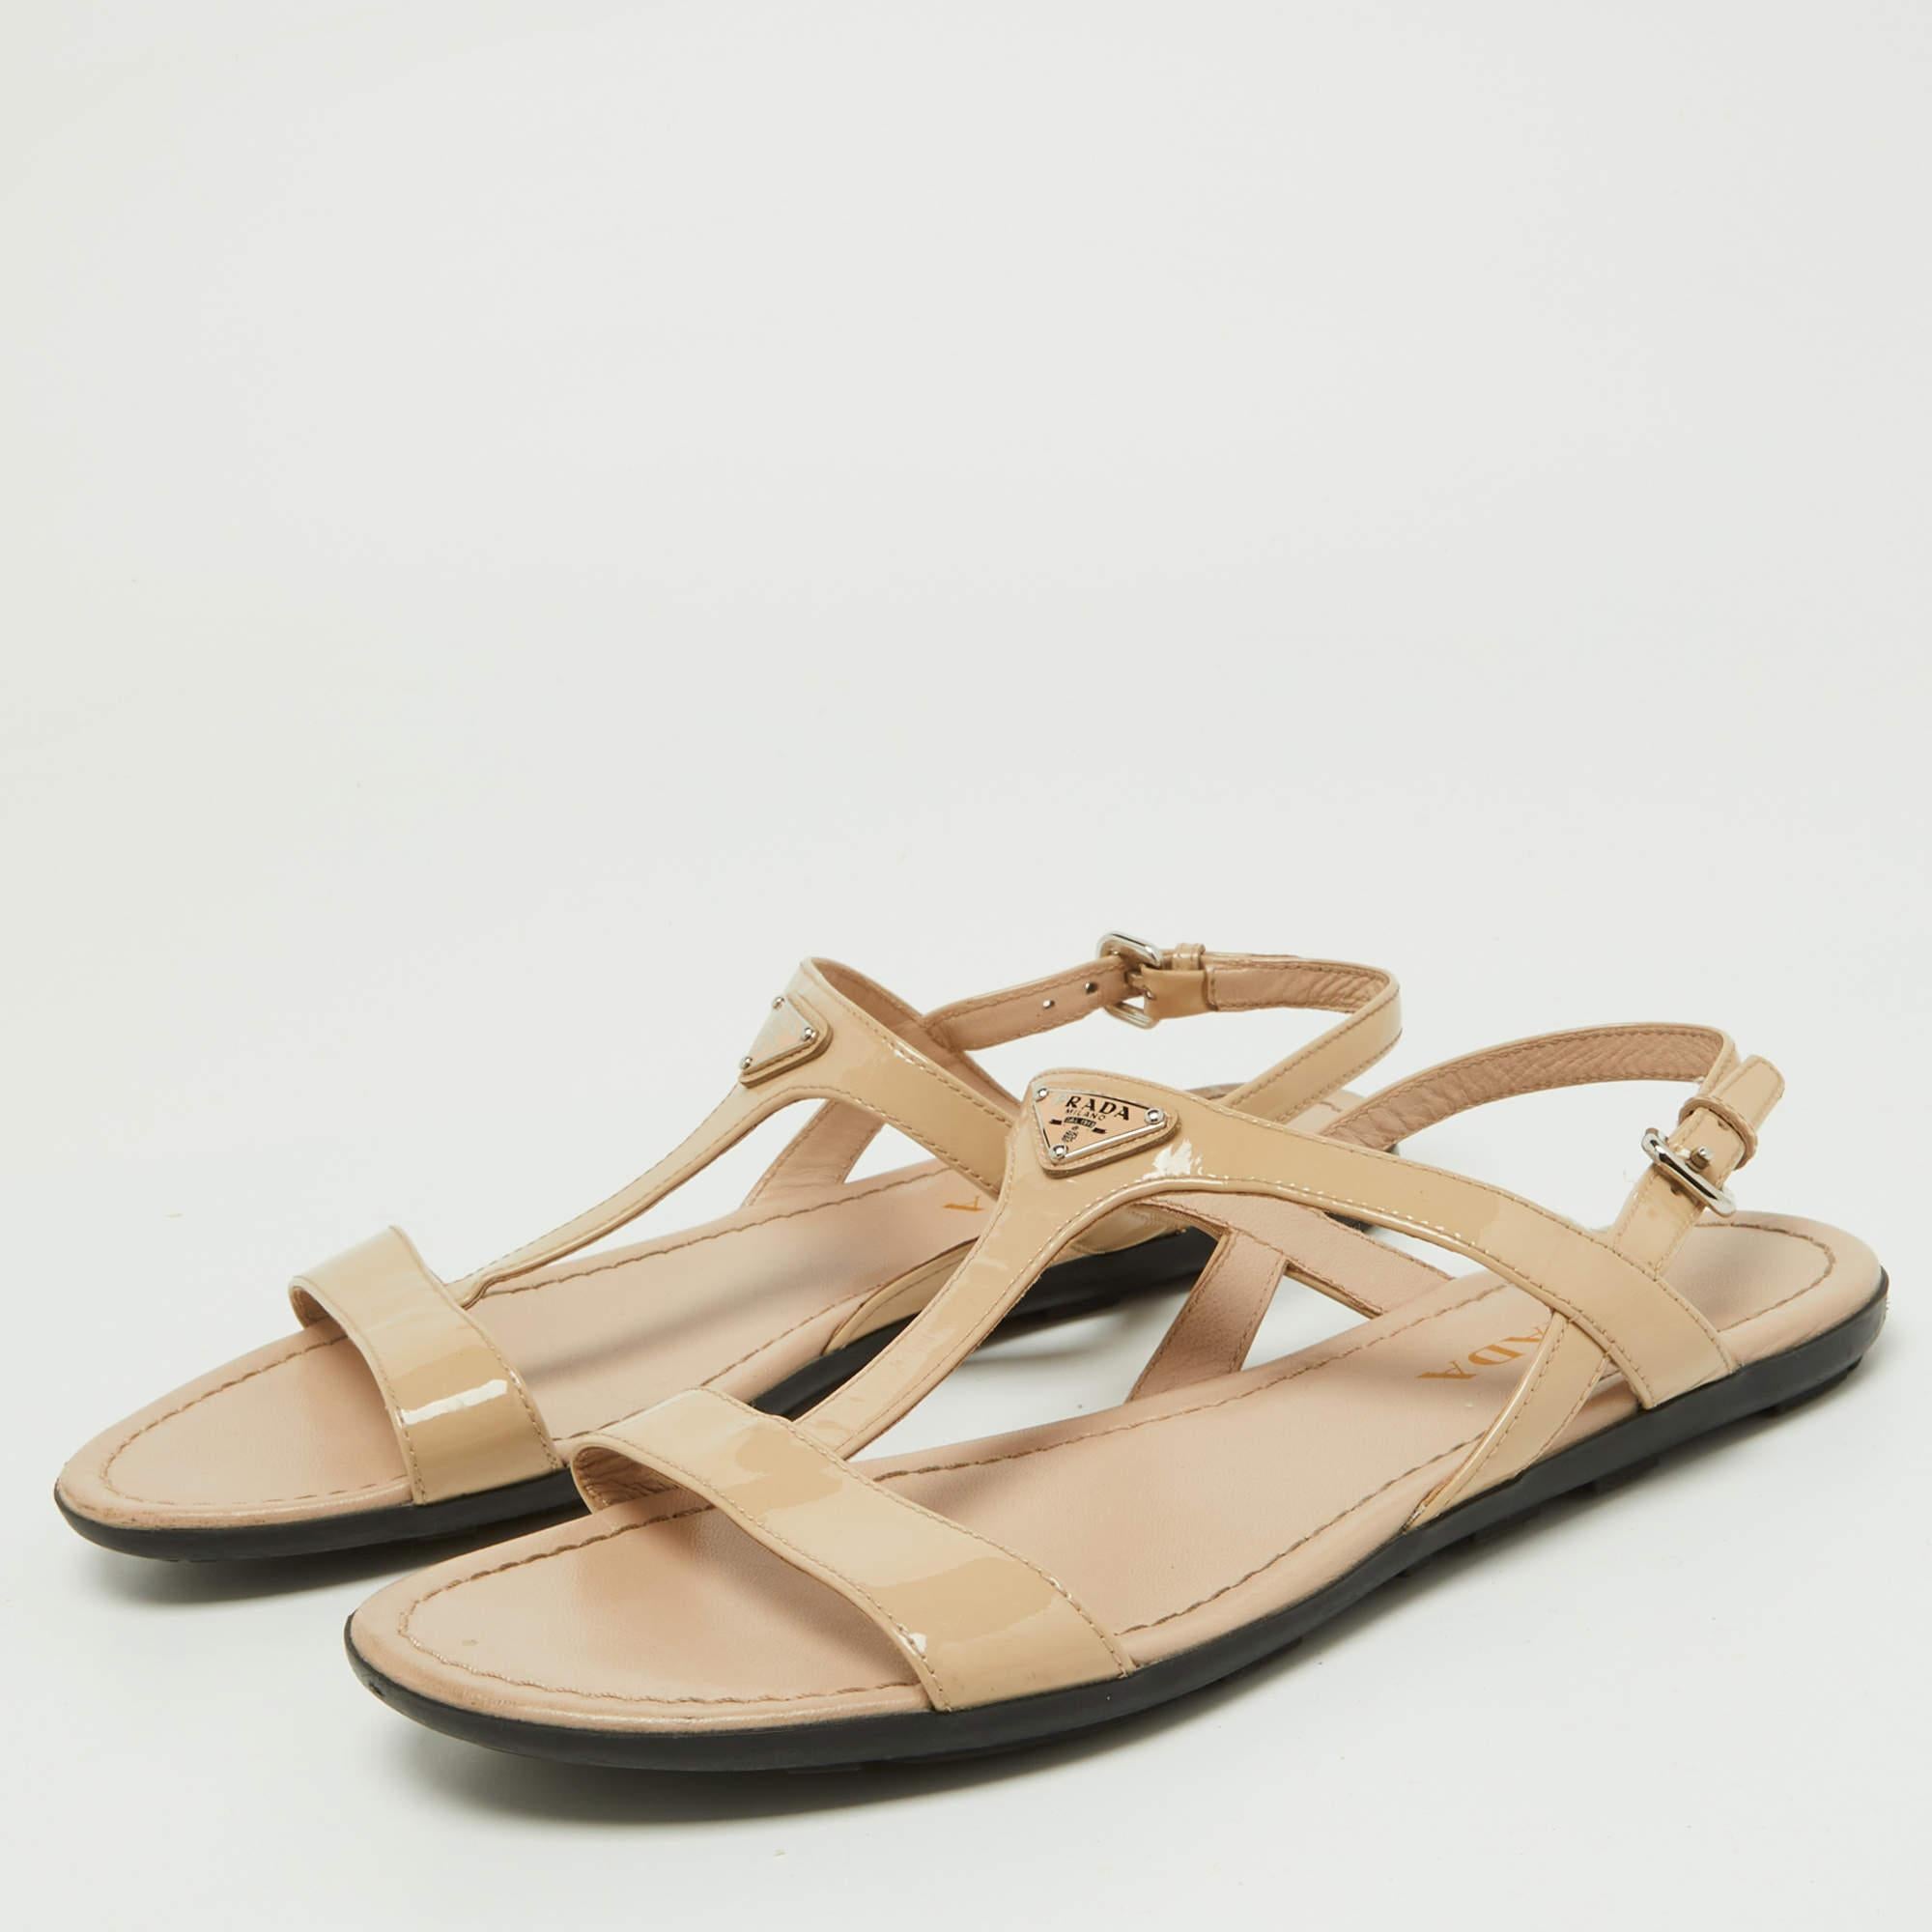 These sandals embody the perfect blend of edgy and timeless style. Crafted from quality materials, these shoes will offer you the perfect height for a sophisticated look.

Includes: Original Dustbag